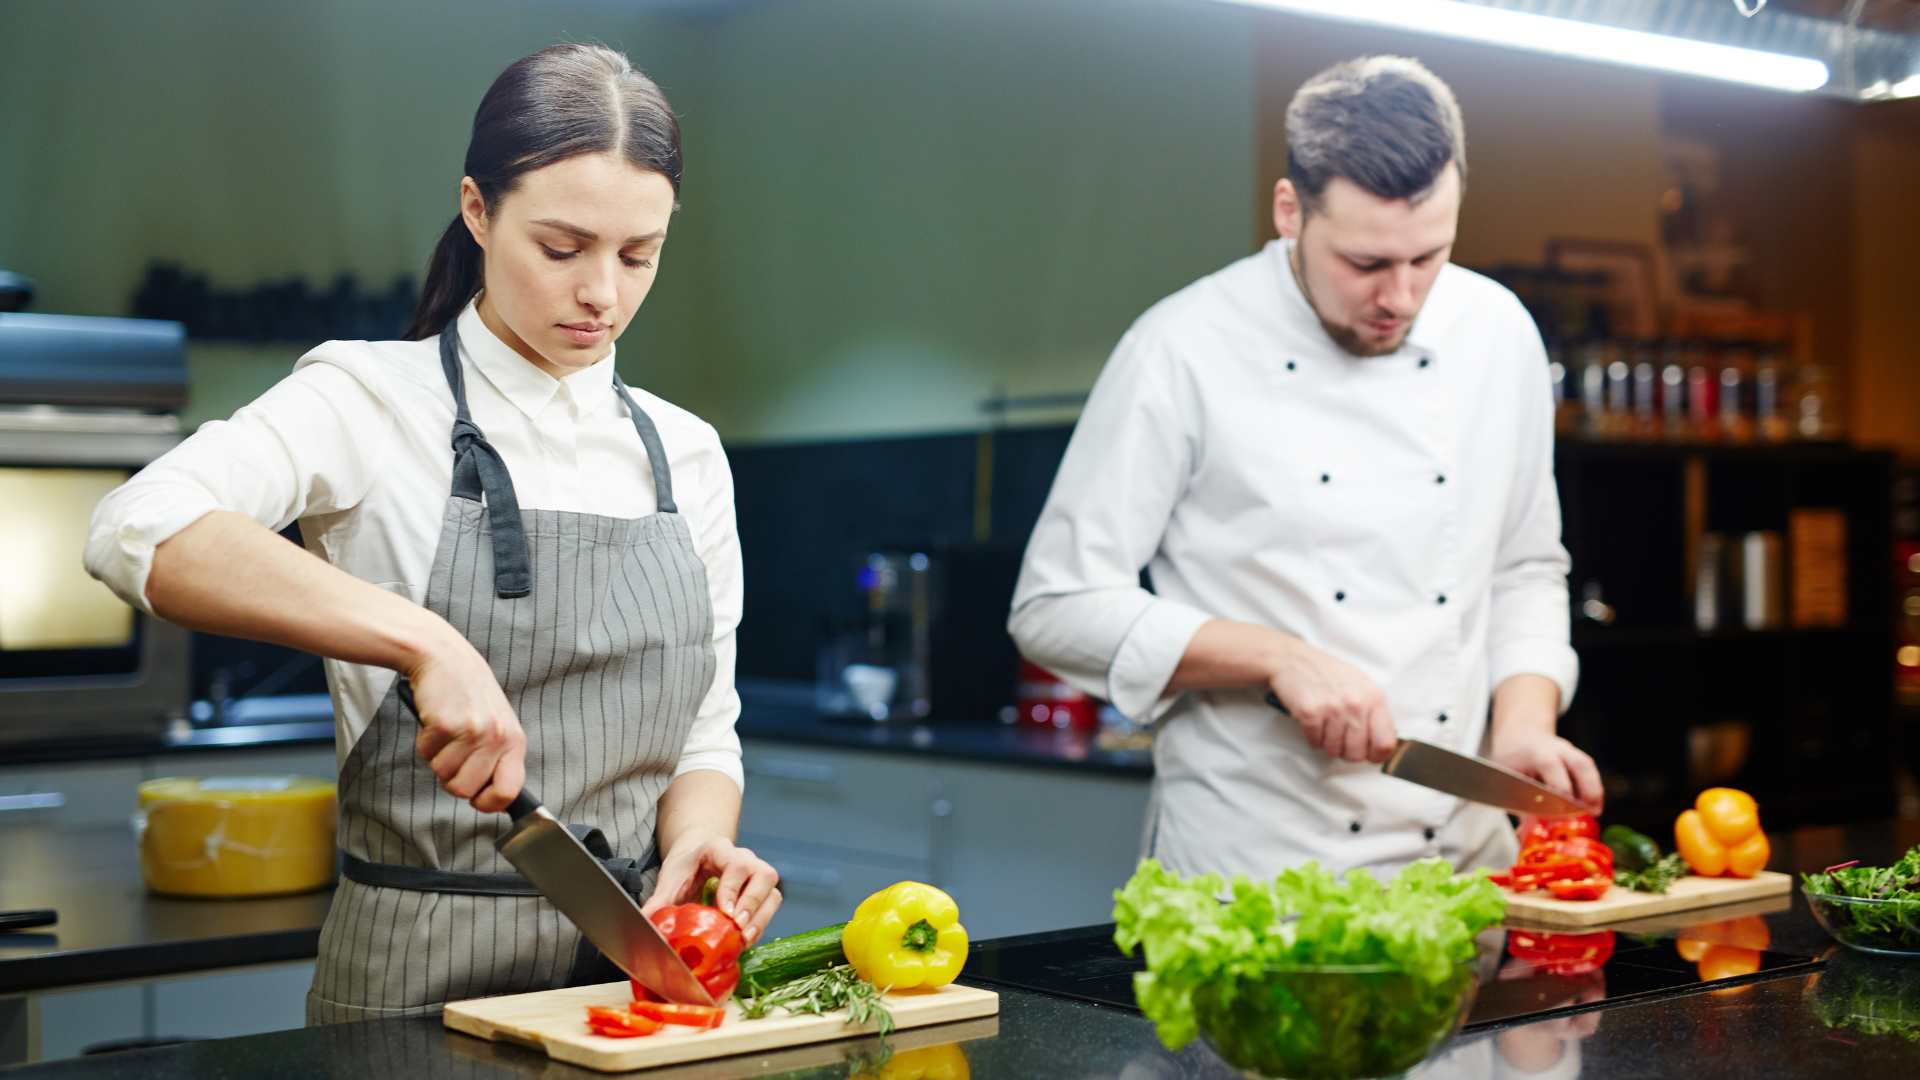 Two people slicing food in a professional kitchen. Hotel and kitchen jobs are expected to grow this year.